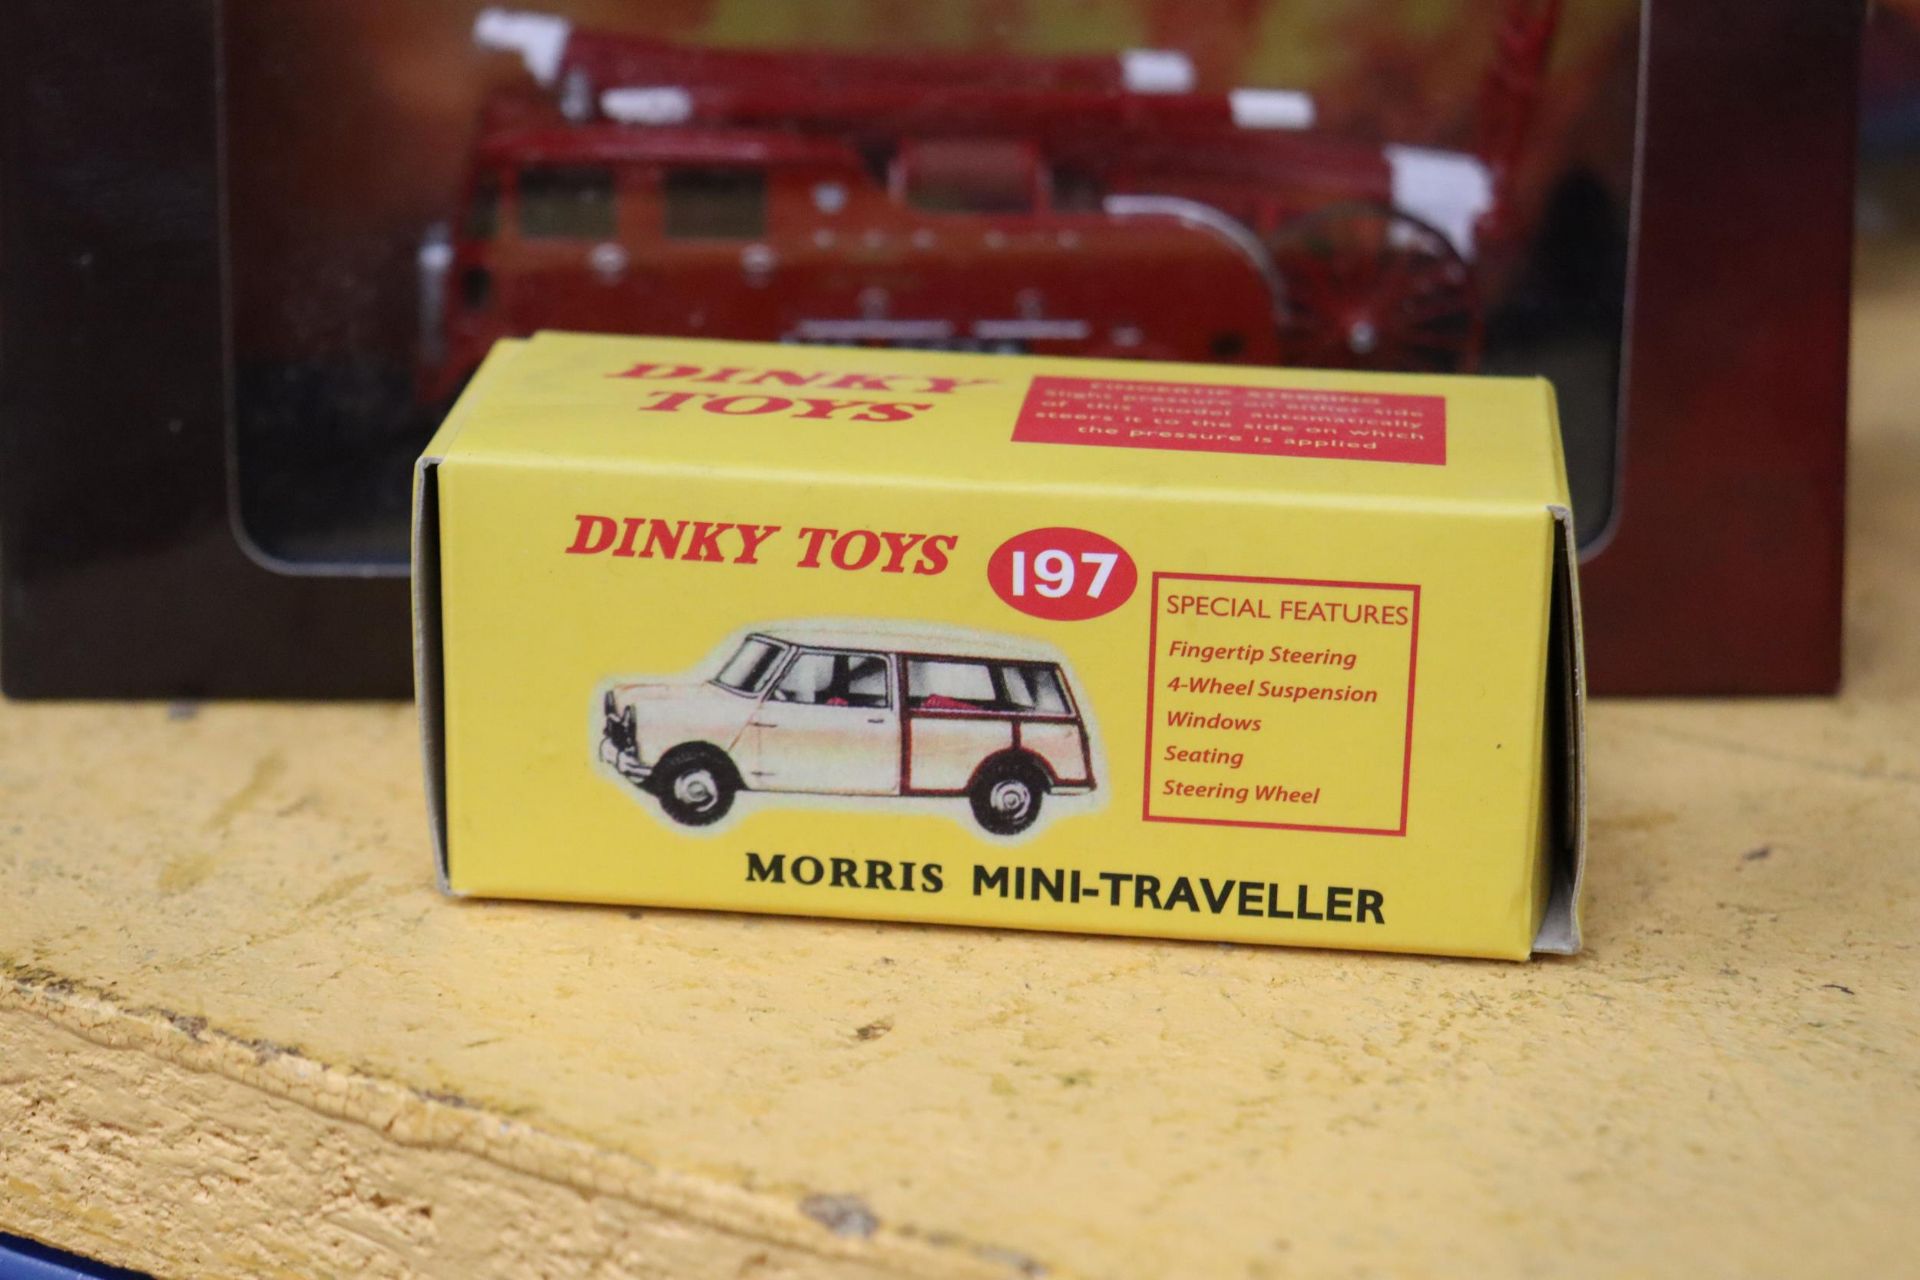 A BOXED DINKY TOYS, NO. 197 MORRIS MINI-TRAVELLER PLUS A BOXED ATLAS FIRE ENGINE - Image 3 of 6